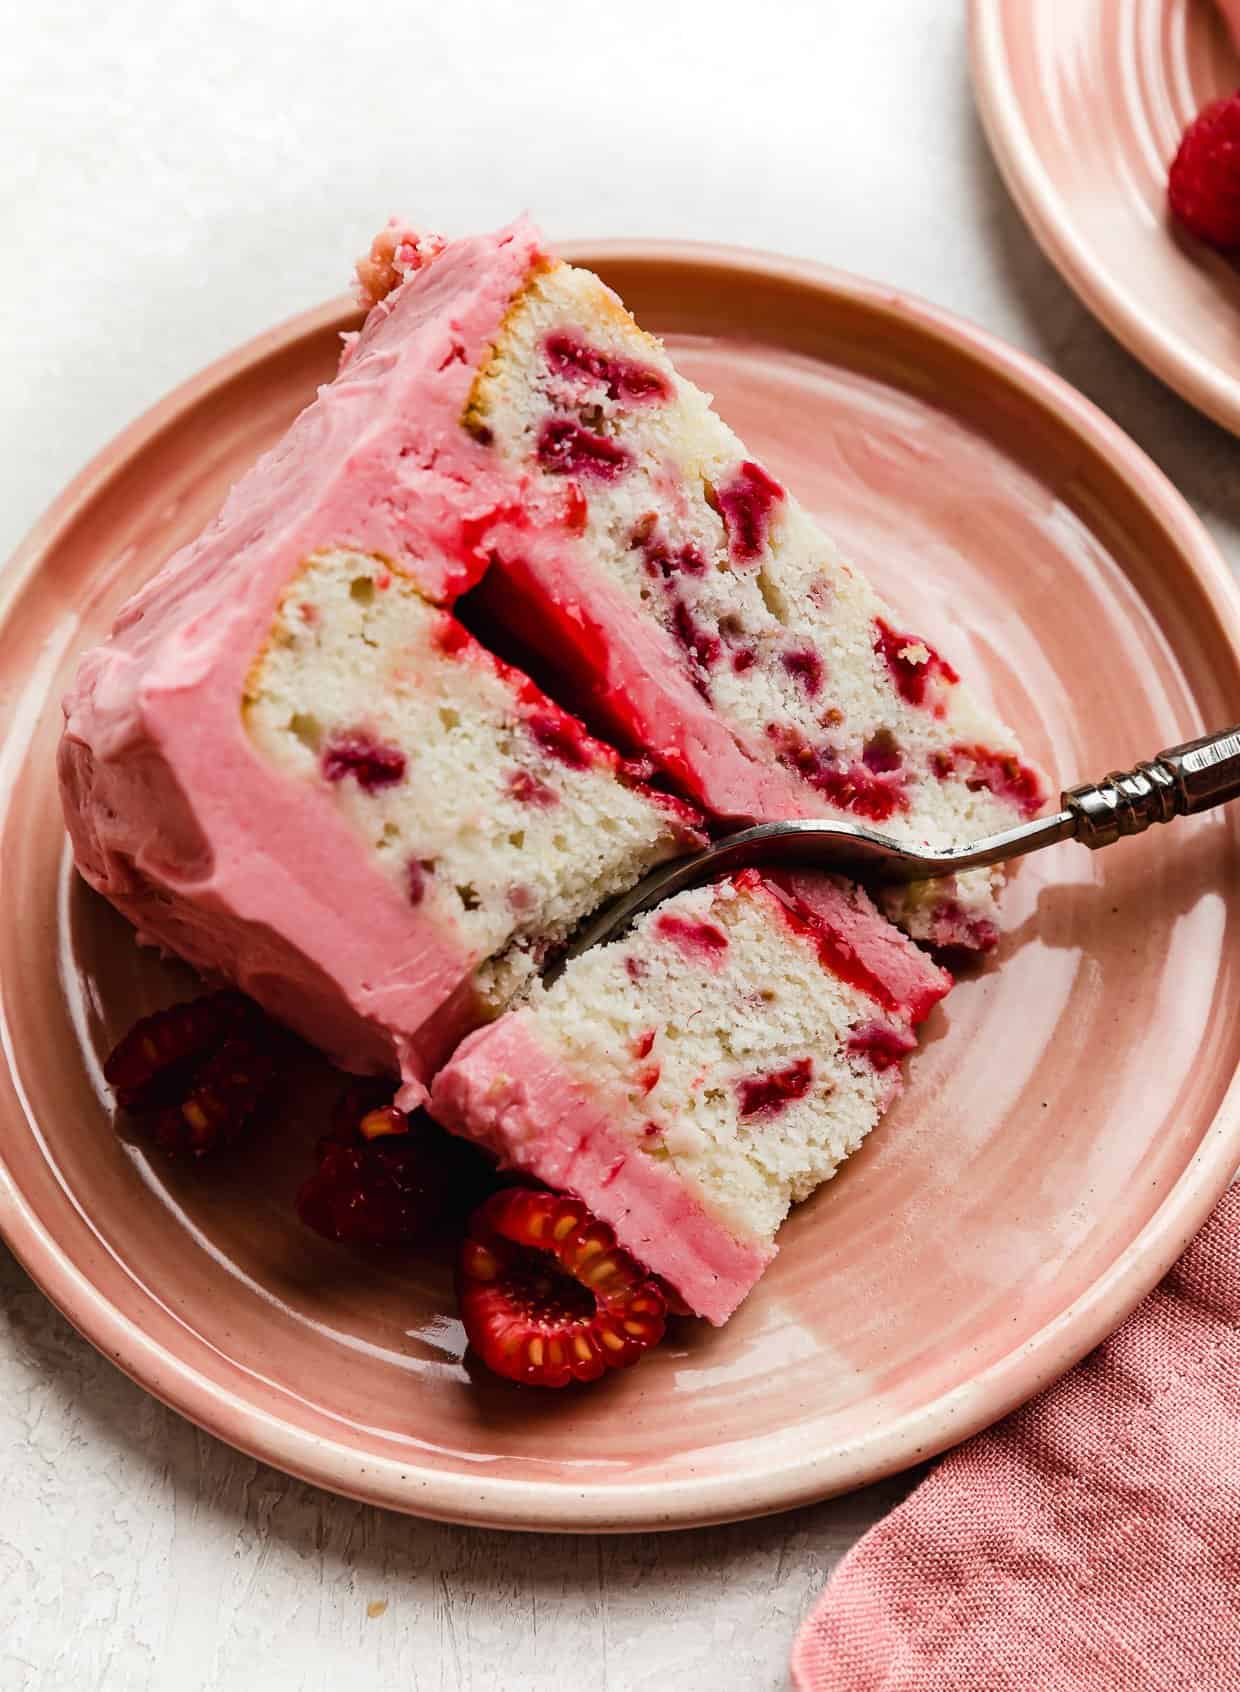 A slice of Lemon Raspberry Cake that has raspberry filing between each layer, on a pink plate with a fork cutting into the cake.